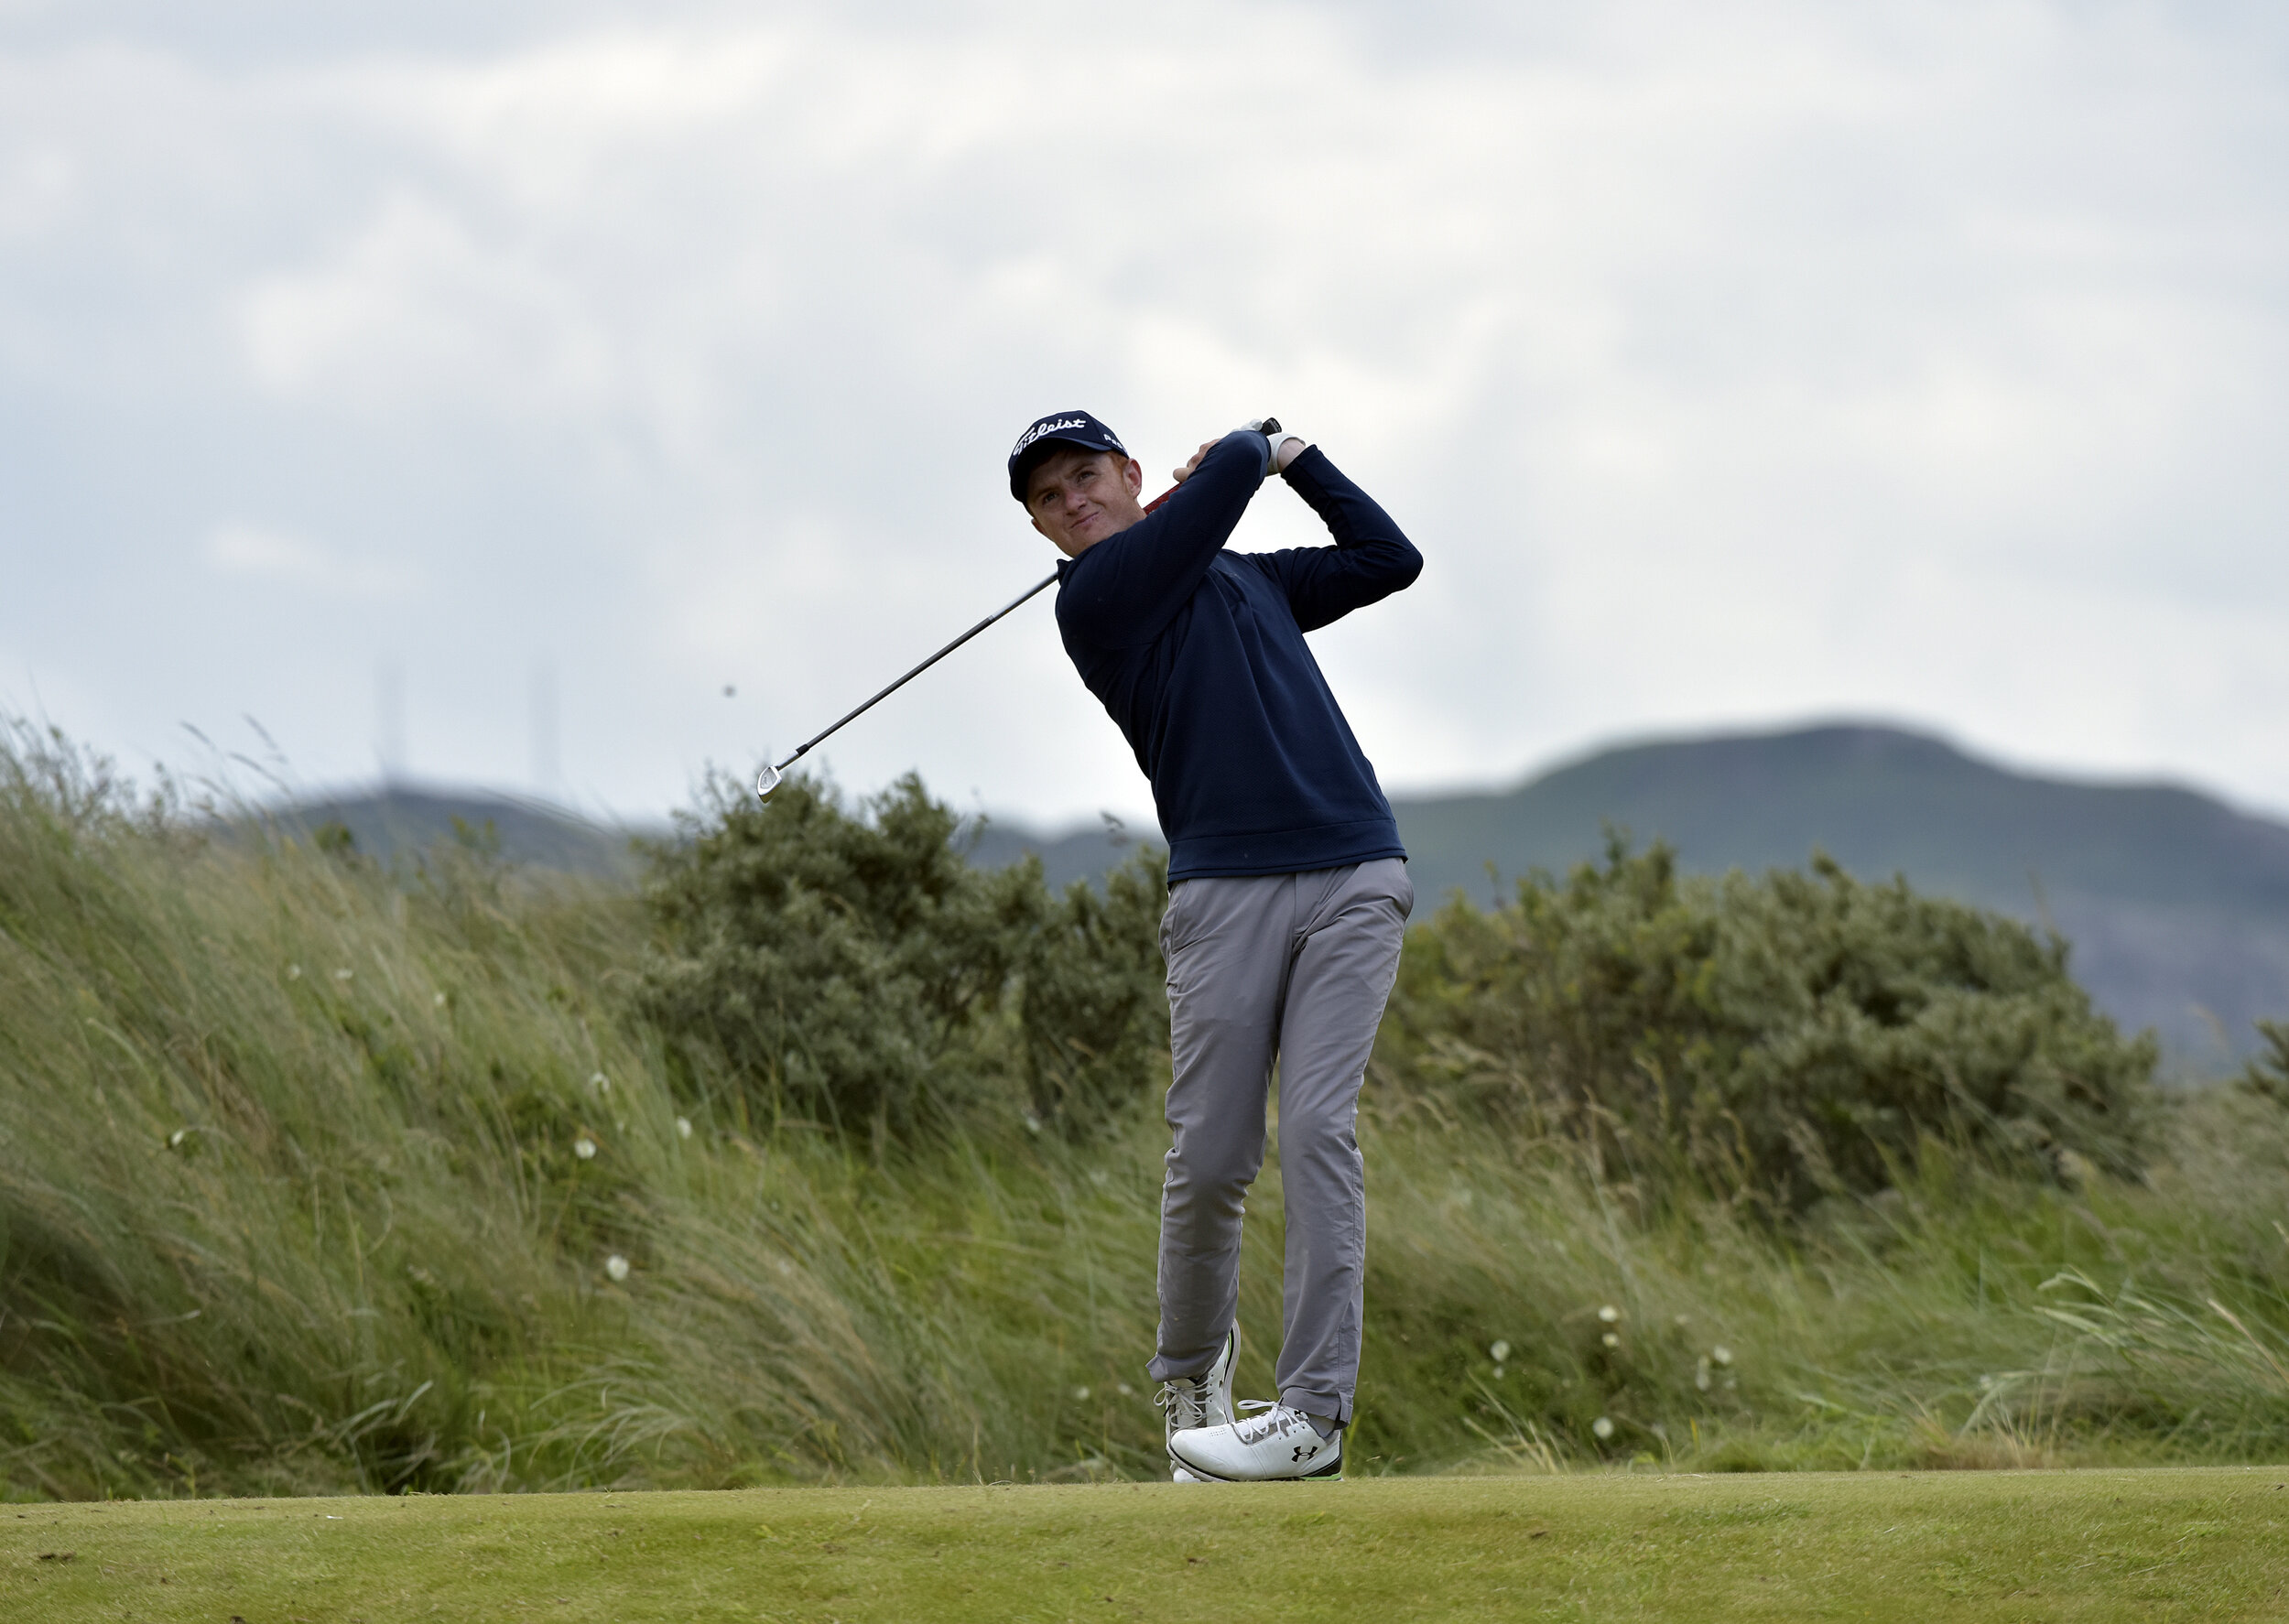 2019 The Amateur Open Championship at Portmarnock Golf Club